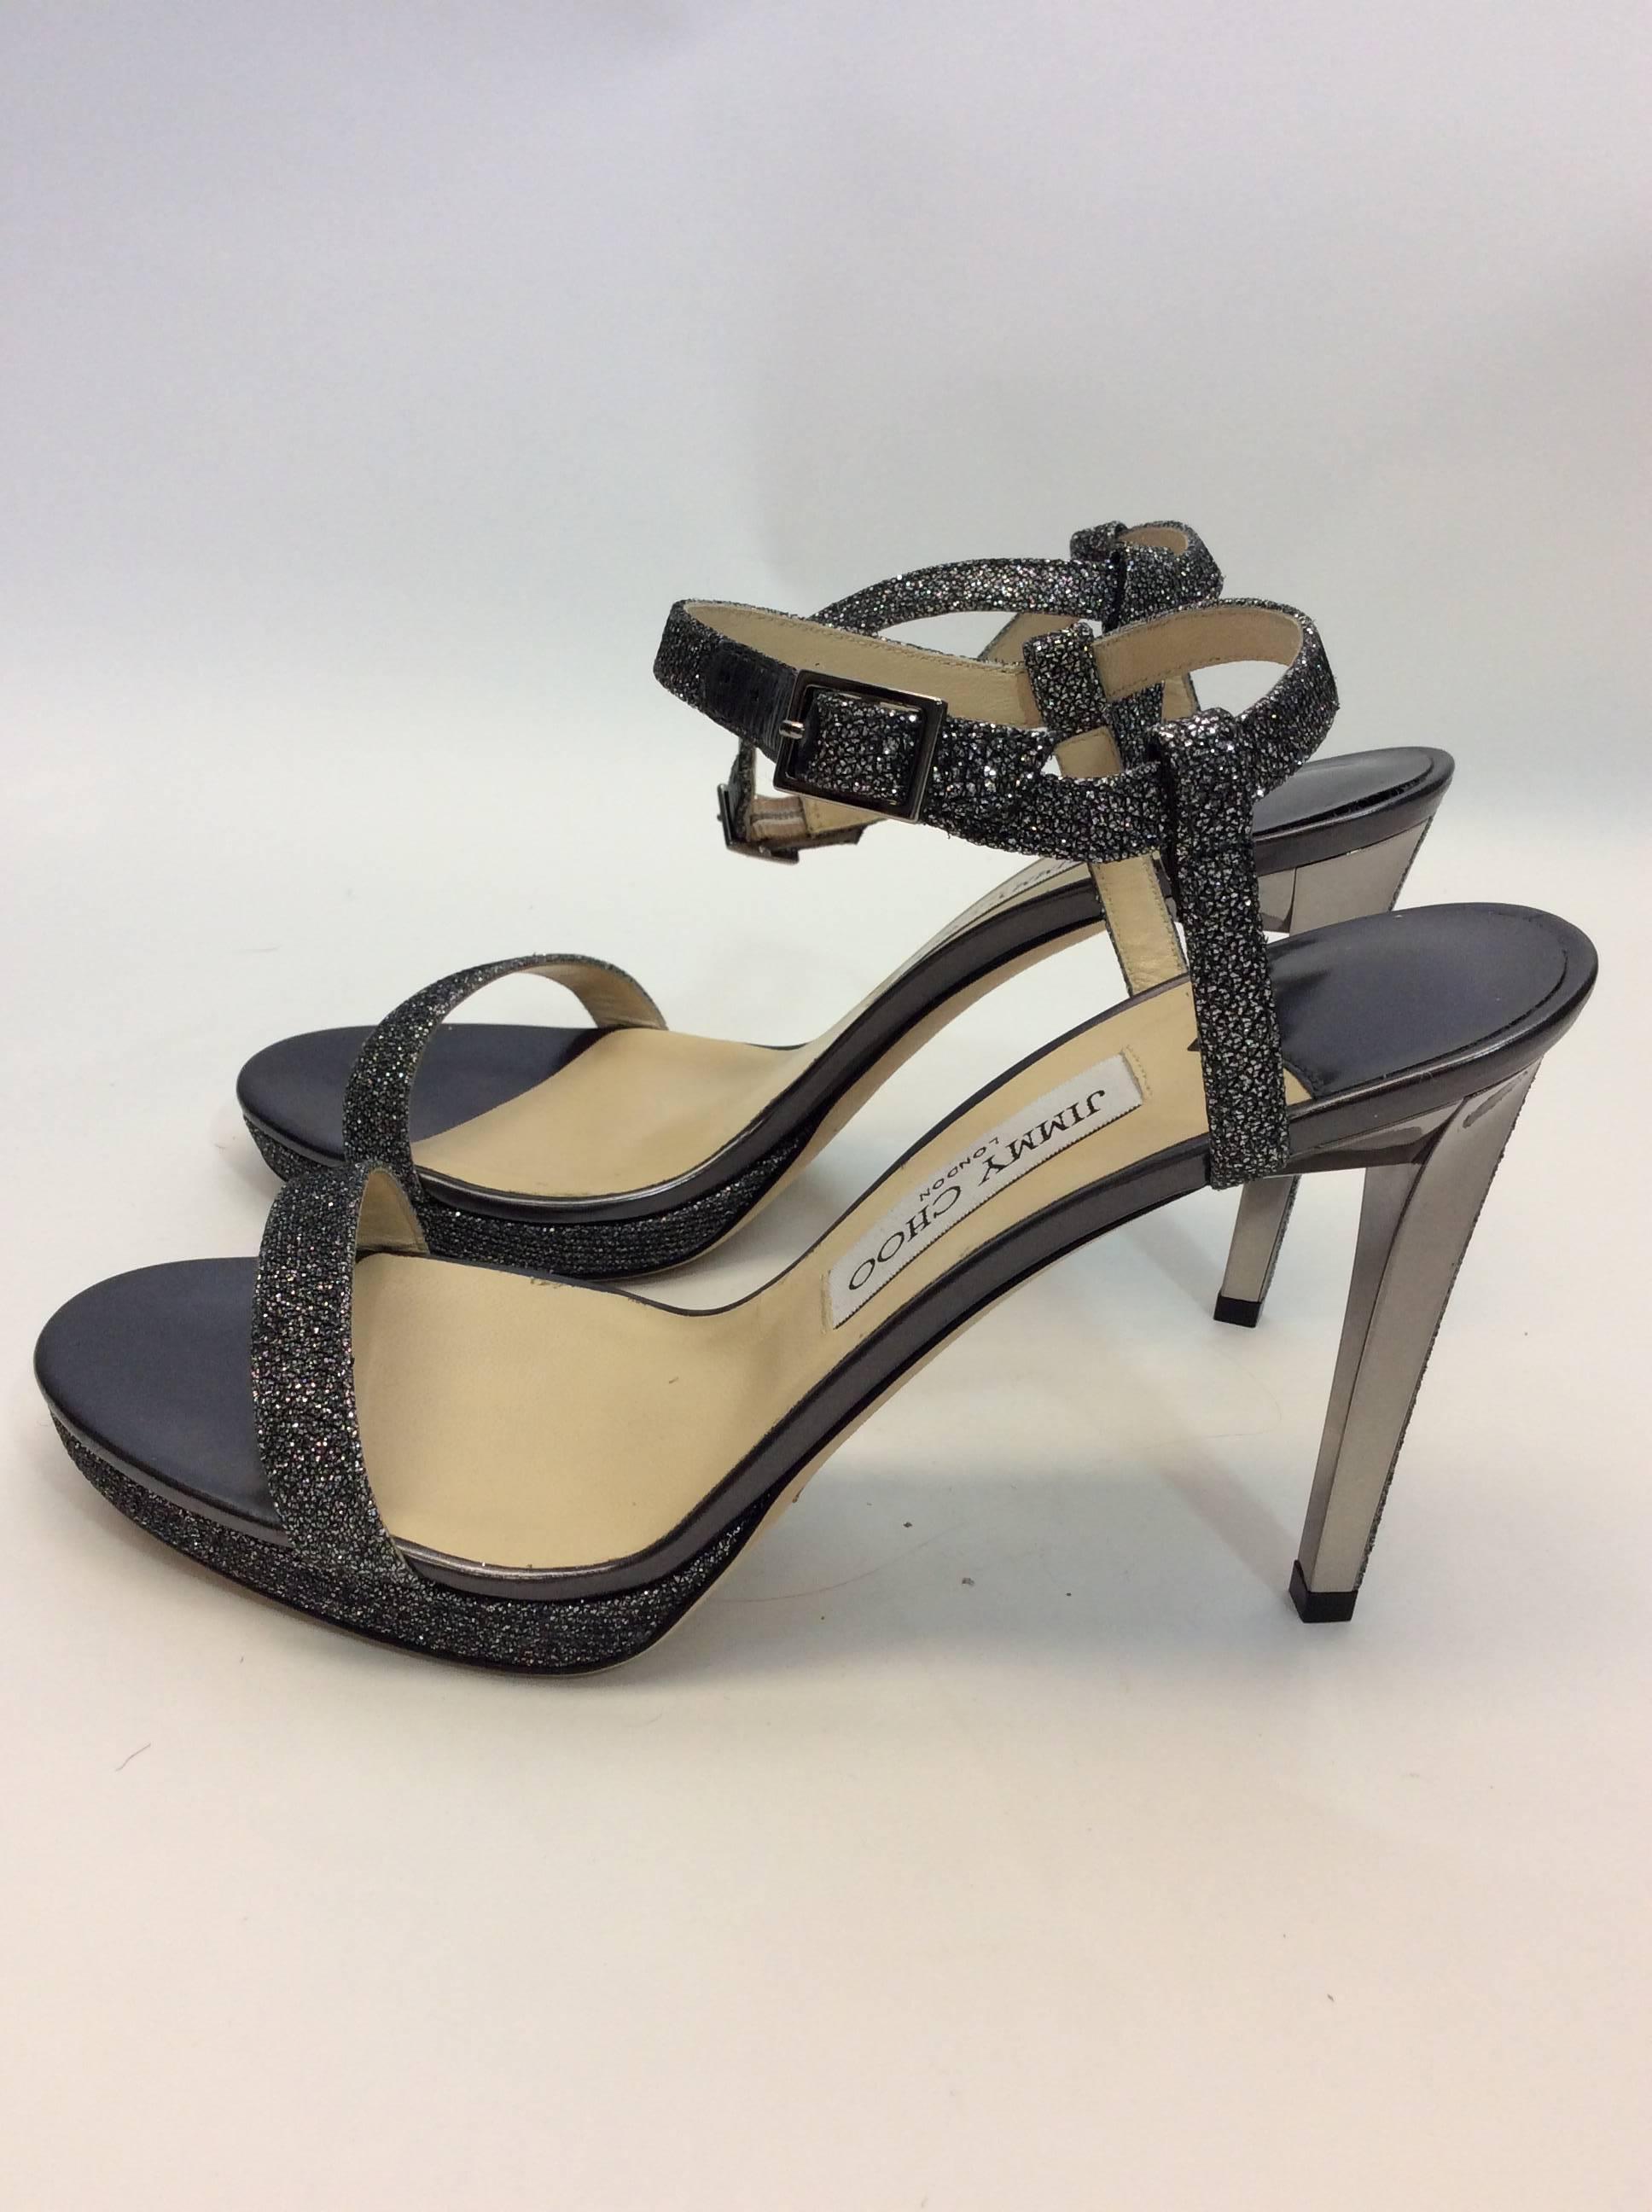 Jimmy Choo NIB Glitter Strap Heels
Size 39.5
Small buckle on the ankle strap
4.25 inch heel
Mirrored heel with silver glitter strip
$400
Made in Italy